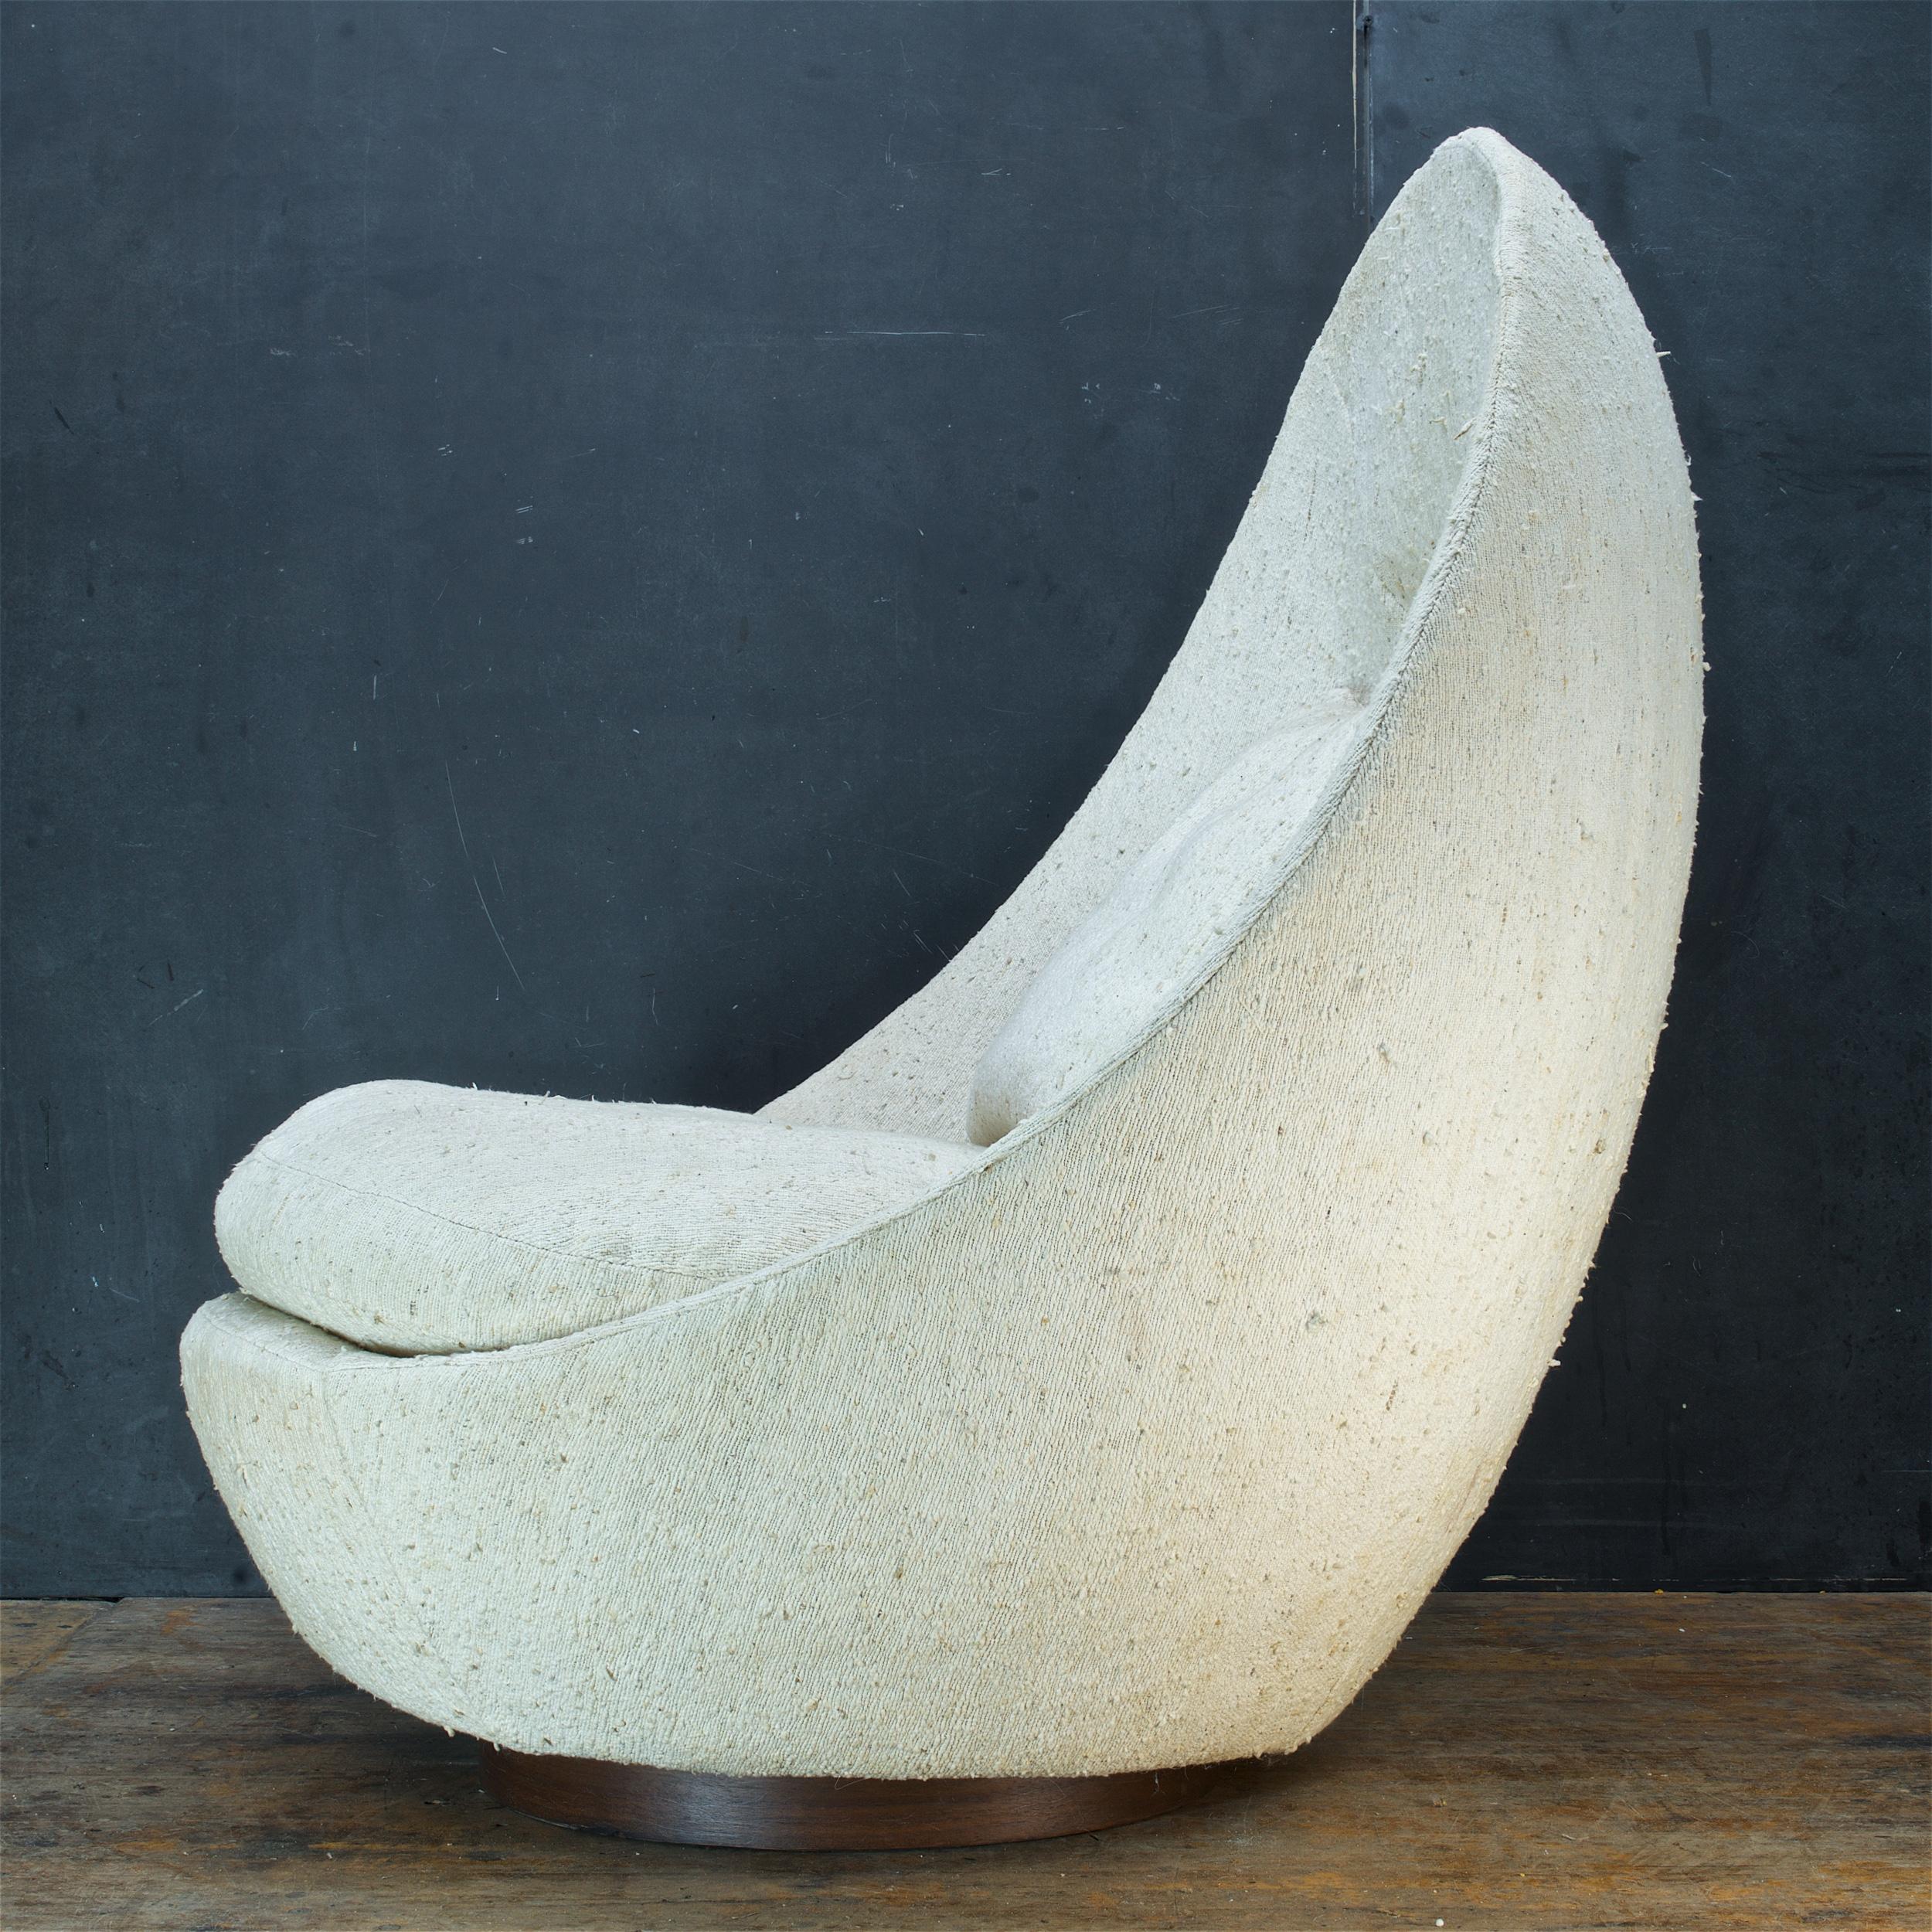 Huge rocking egg chair by Milo Baughman for Thayer Coggin Inc. Has a Tilt Swivel Base Mechanism, or Rocking Swivel.

Old original upholstery, cushions are still soft, no hard foam emissions. So this could be used as is, but we would recommend